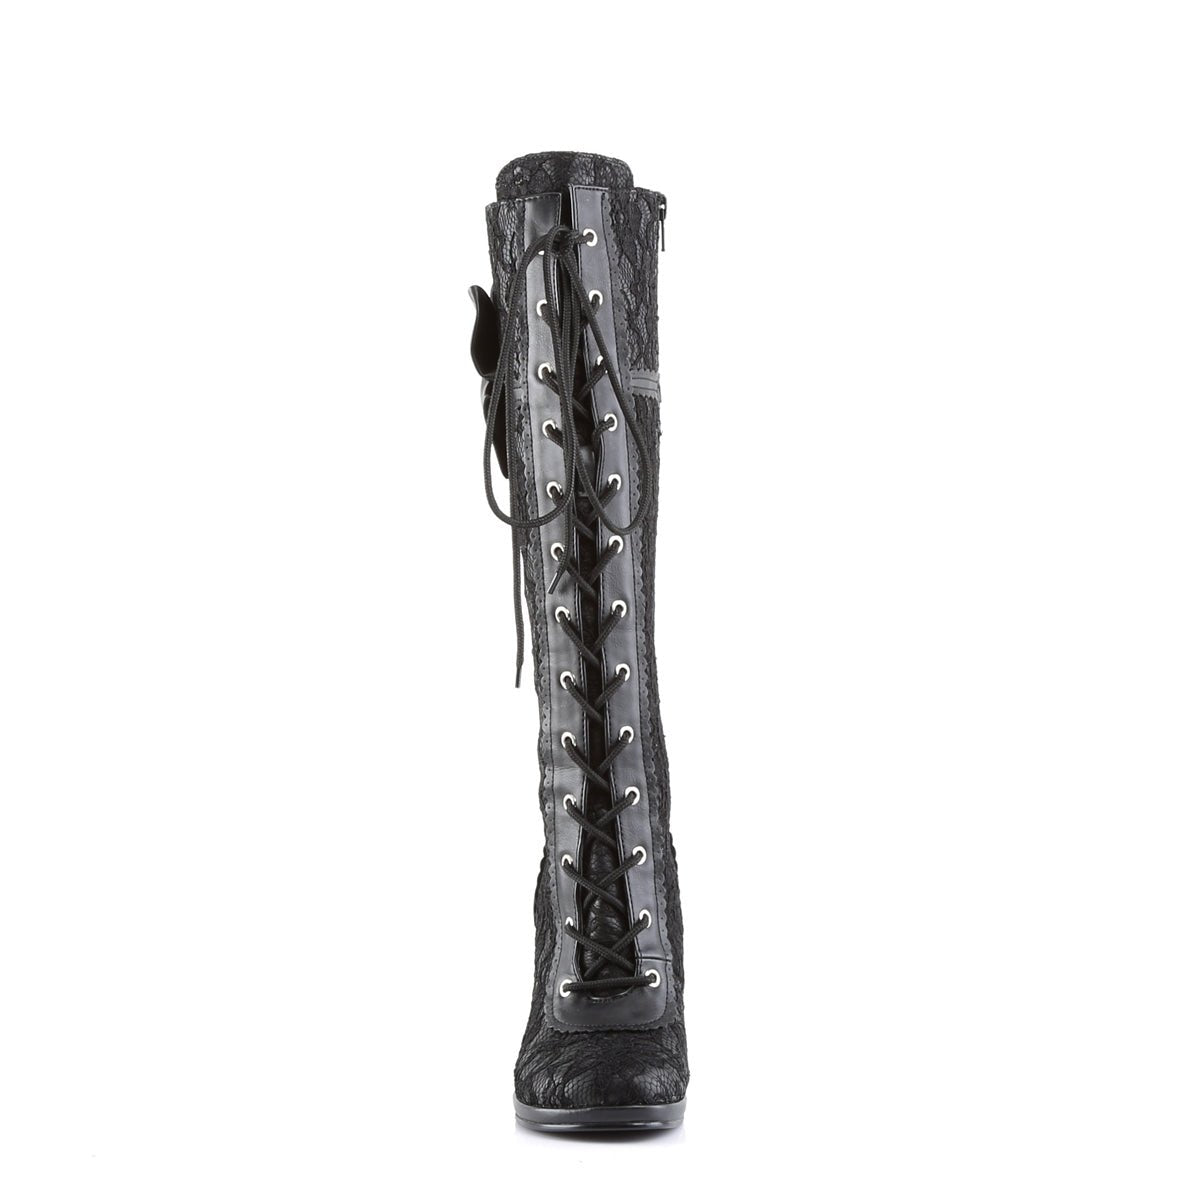 Too Fast | Demonia Glam 240 | Black Vegan Leather With A Lace Overlay Women's Knee High Boots